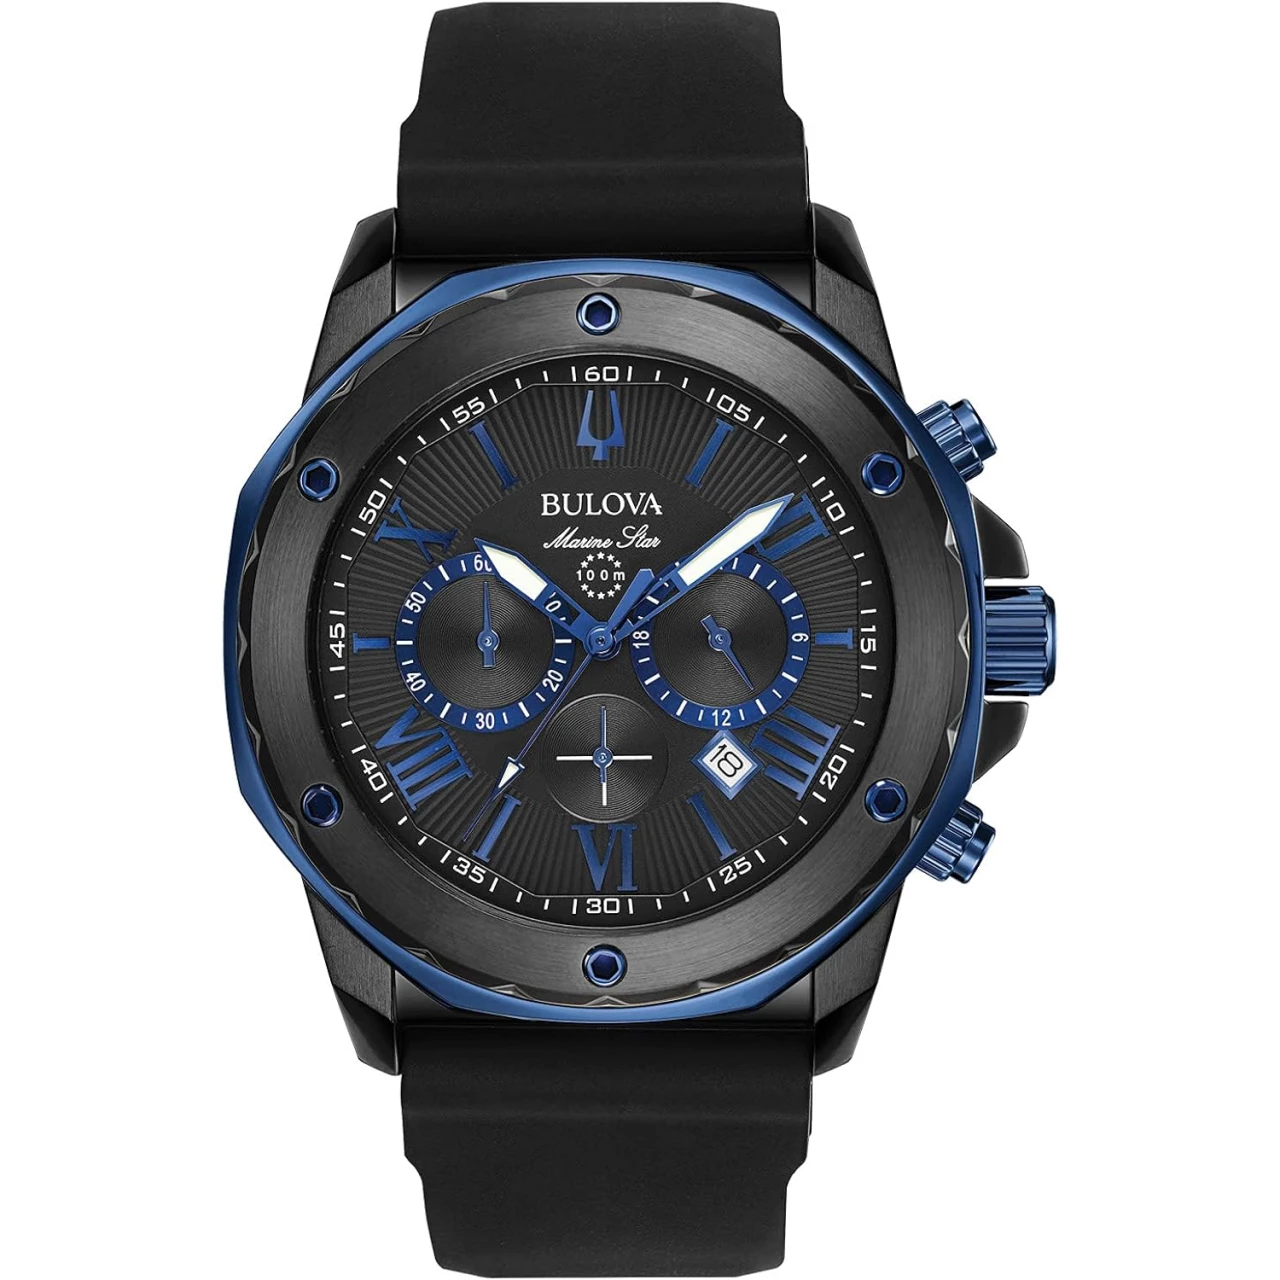 Bulova Men&rsquo;s Marine Star &lsquo;Series A&rsquo; Chronograph Quartz Watch, Luminous Markers, Rotating Dial, 100M Water Resistant, 44mm